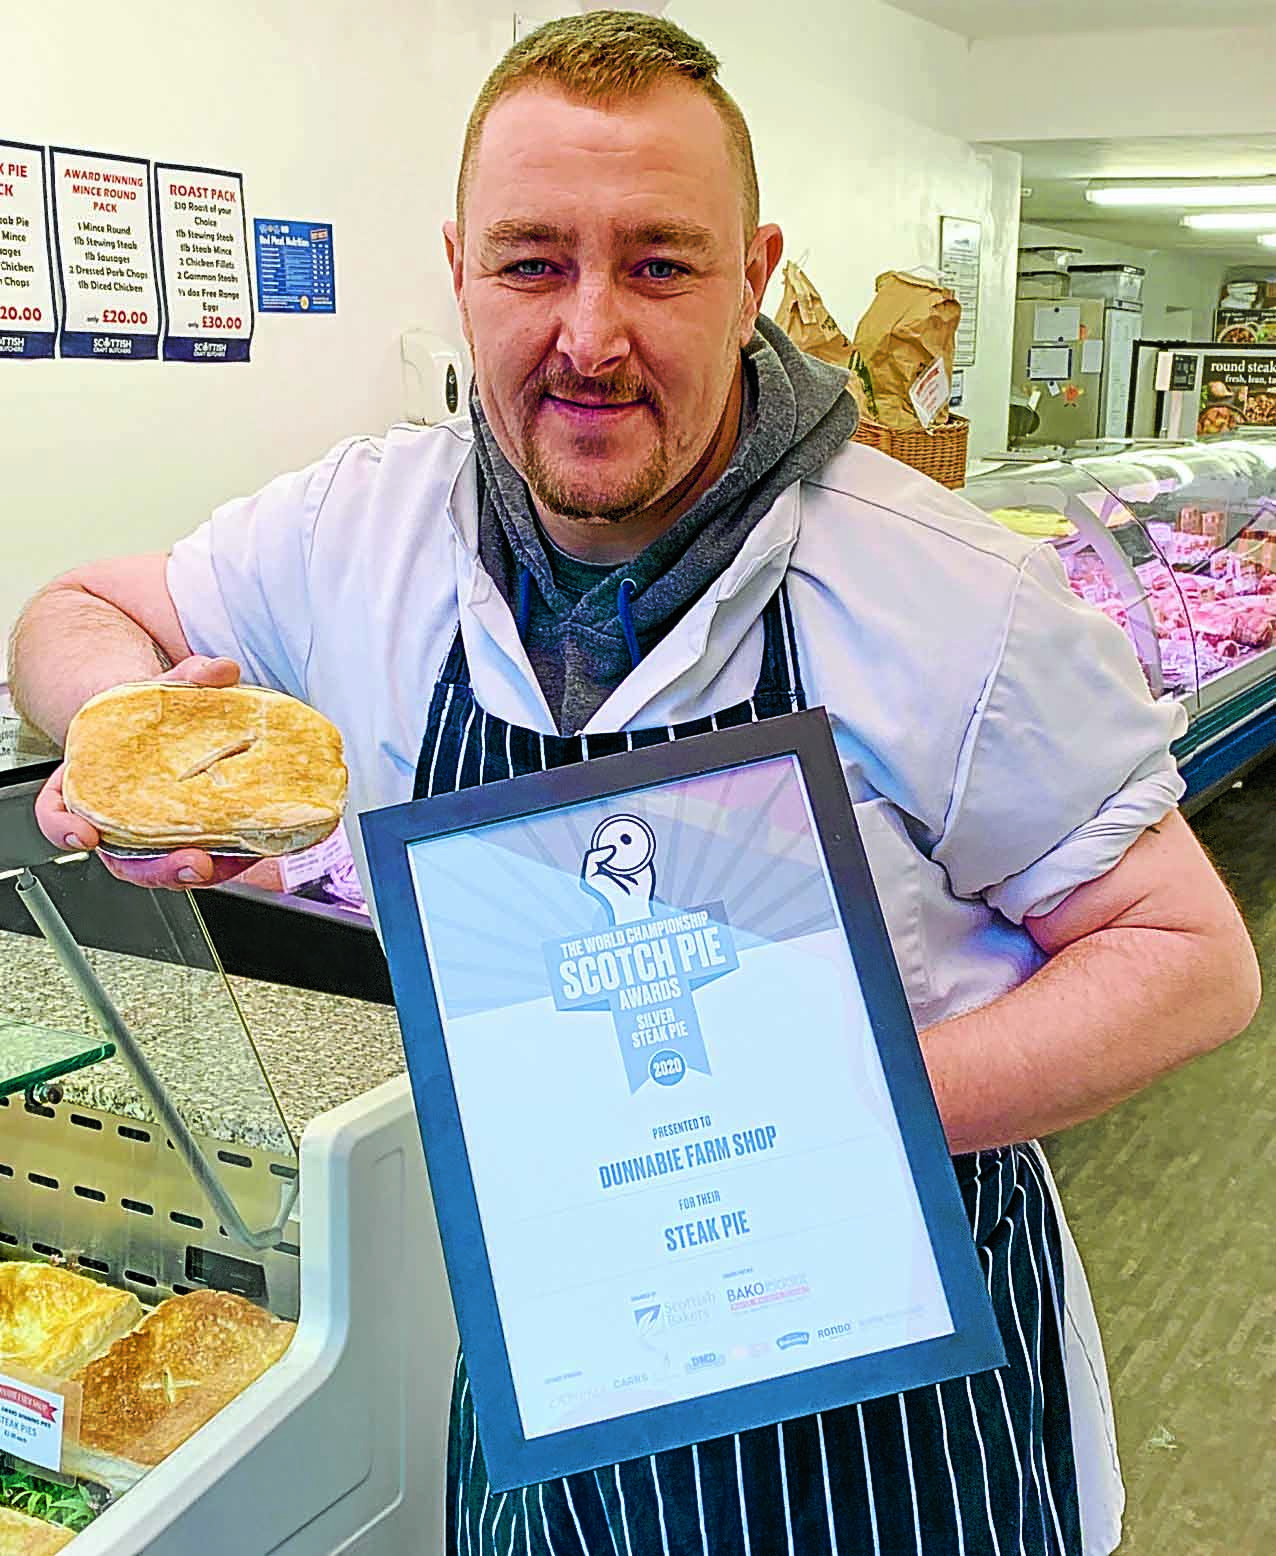 Steak pie is a silver success - DNG Online Limited